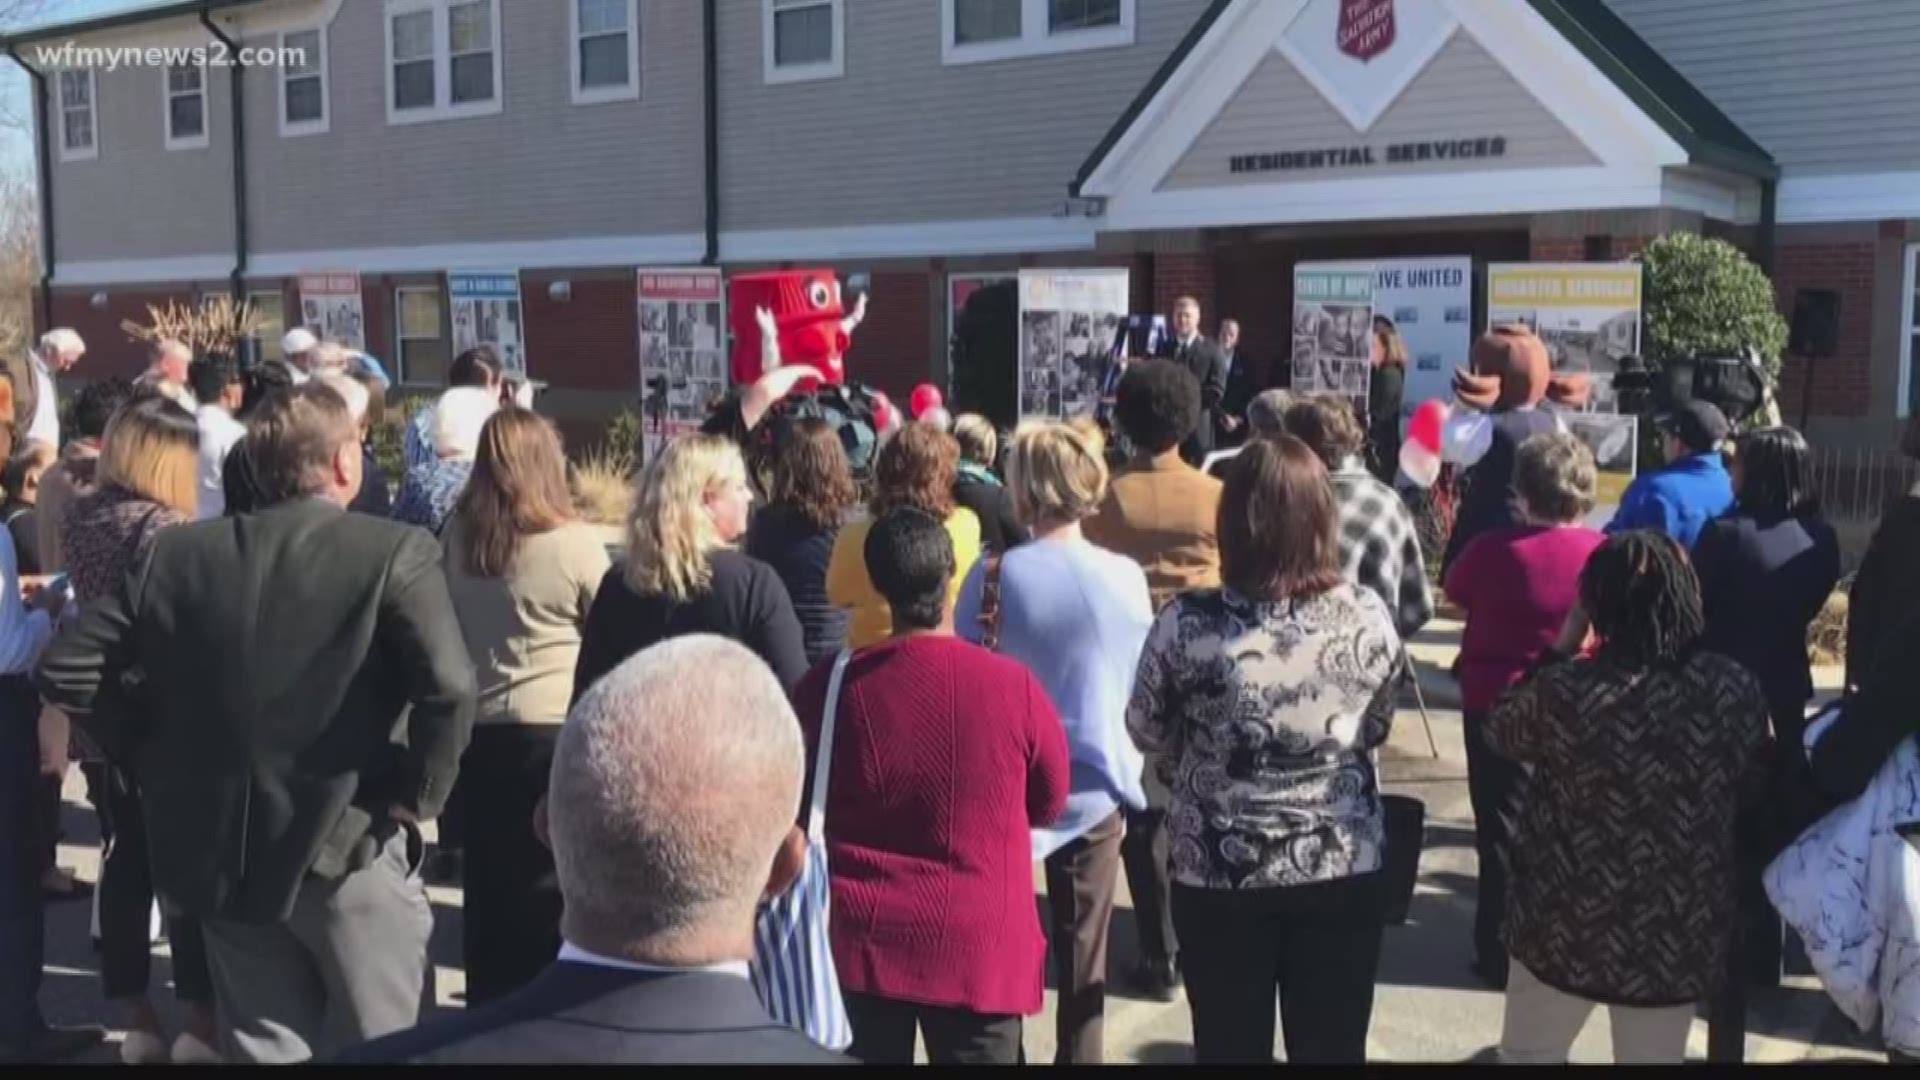 Mayor nancy vaughan and other greensboro leaders cut the ribbon today at the salvation army's center of hope location